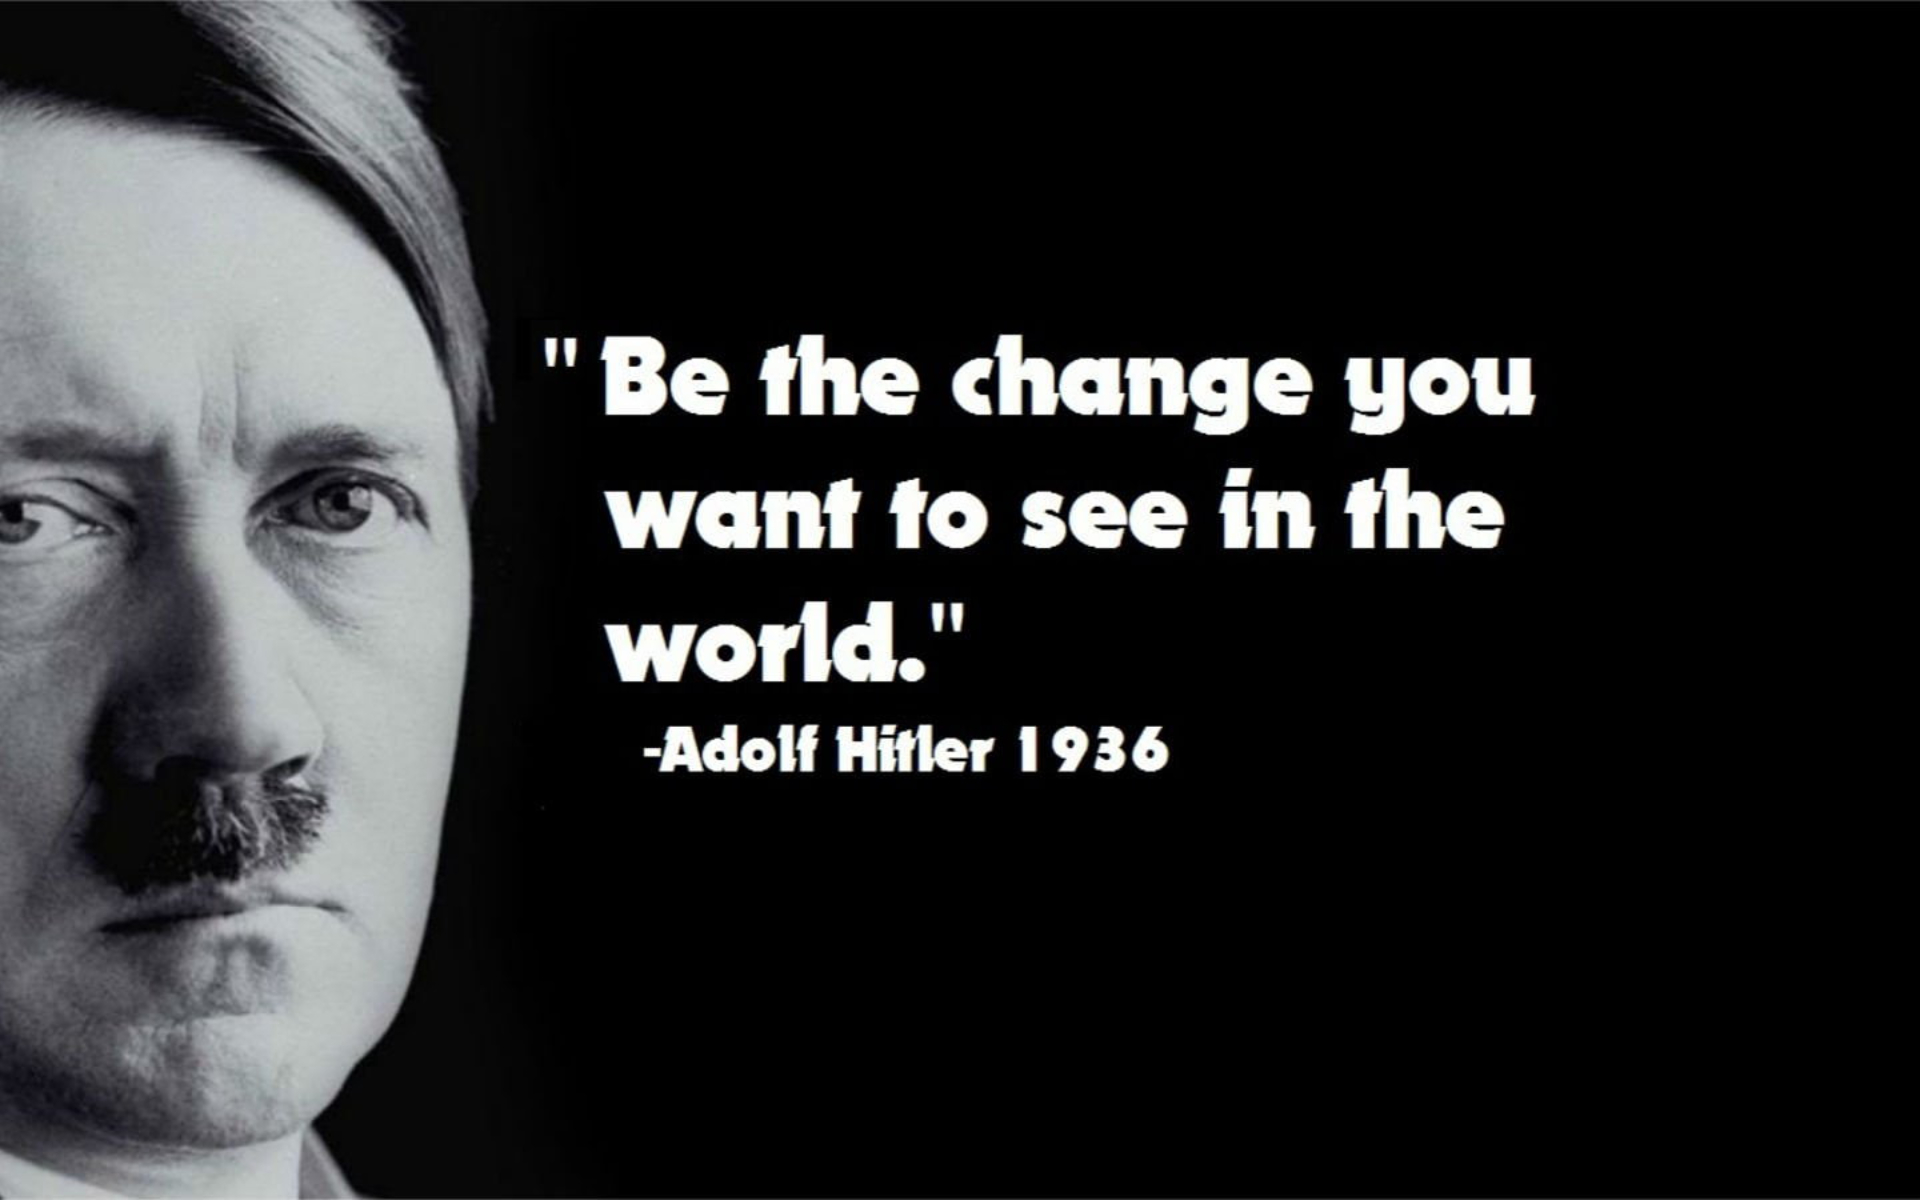 hitler famous quotes and saying